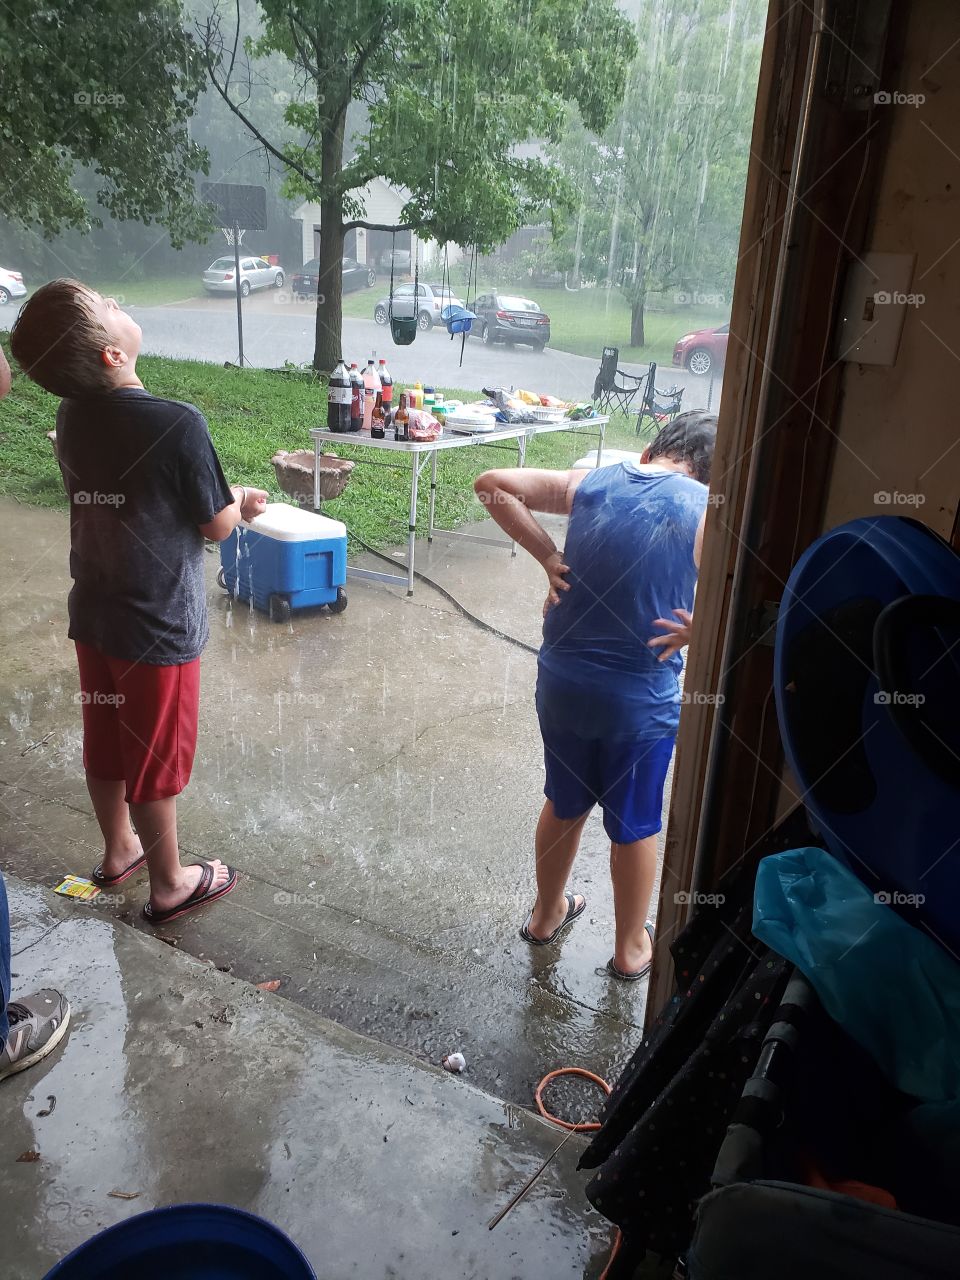 two boys playing in the rain